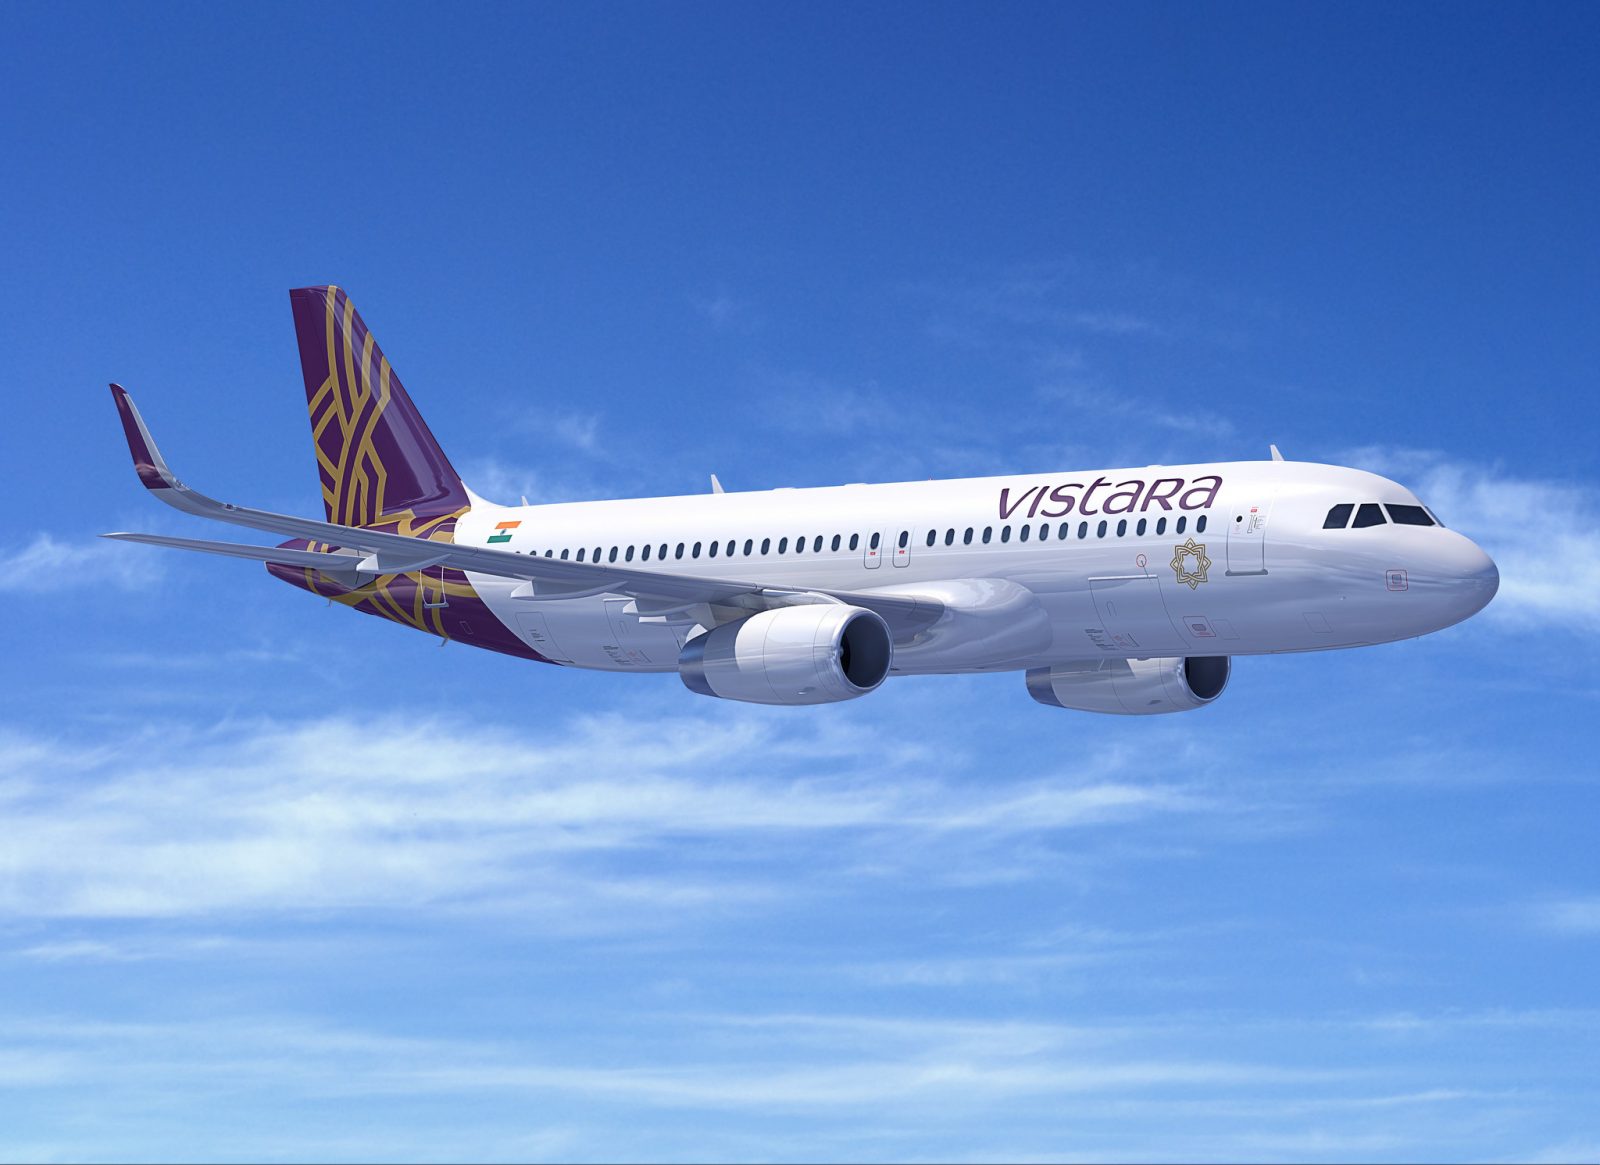 Equal Opportunities In Reverse: Indian Airline, Vistara Hires Male Cabin Crew For First Time